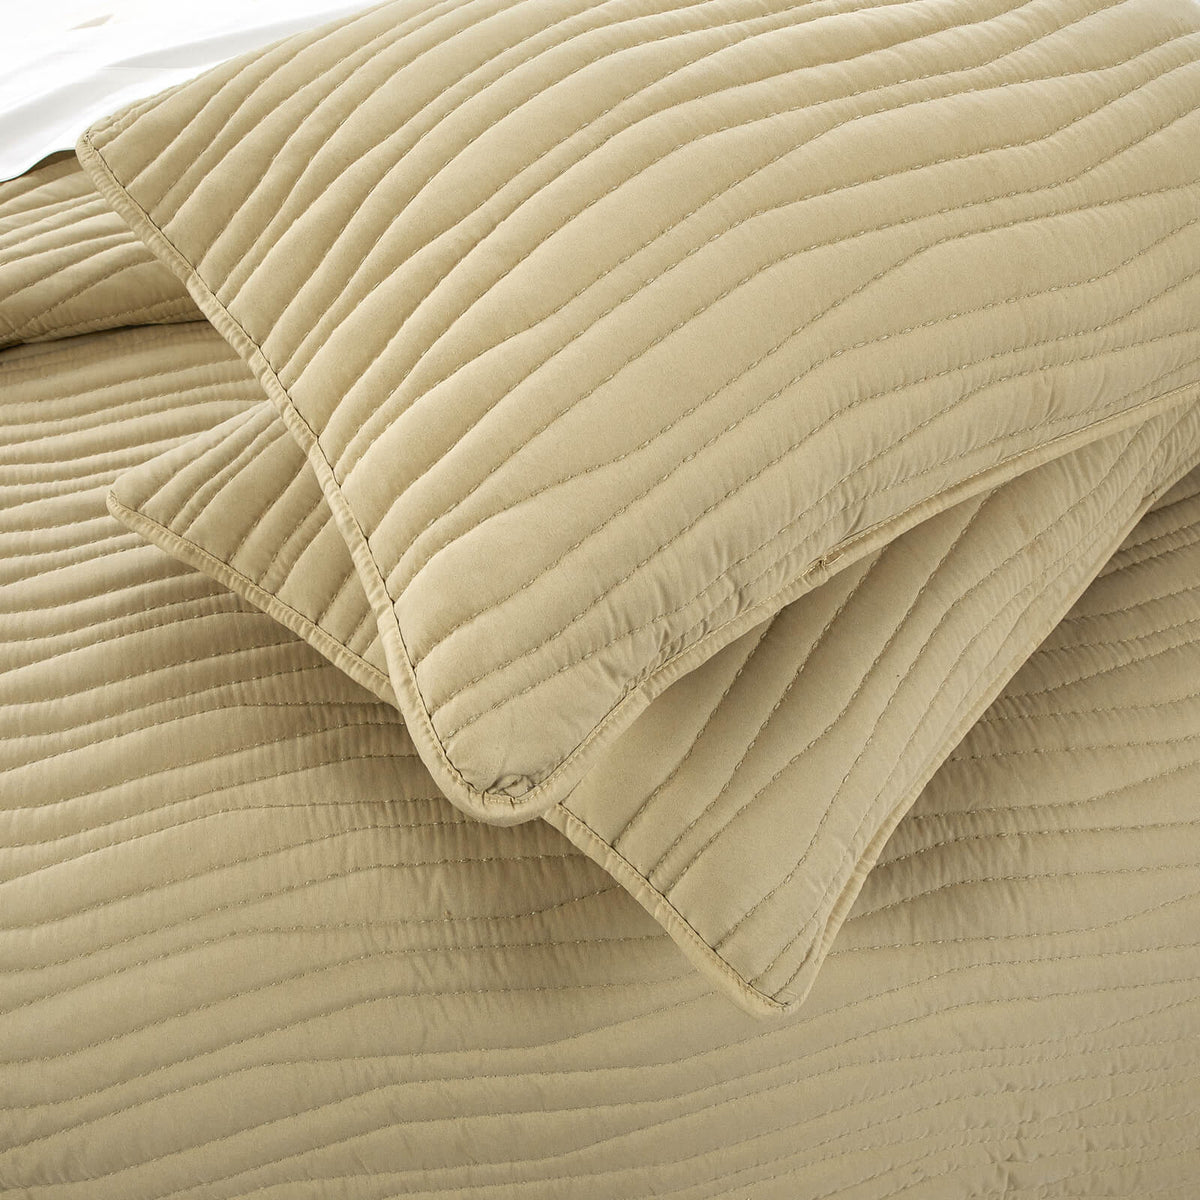 Chic Home Kyrie 3 Piece Stitched Wavy Quilt Set Taupe